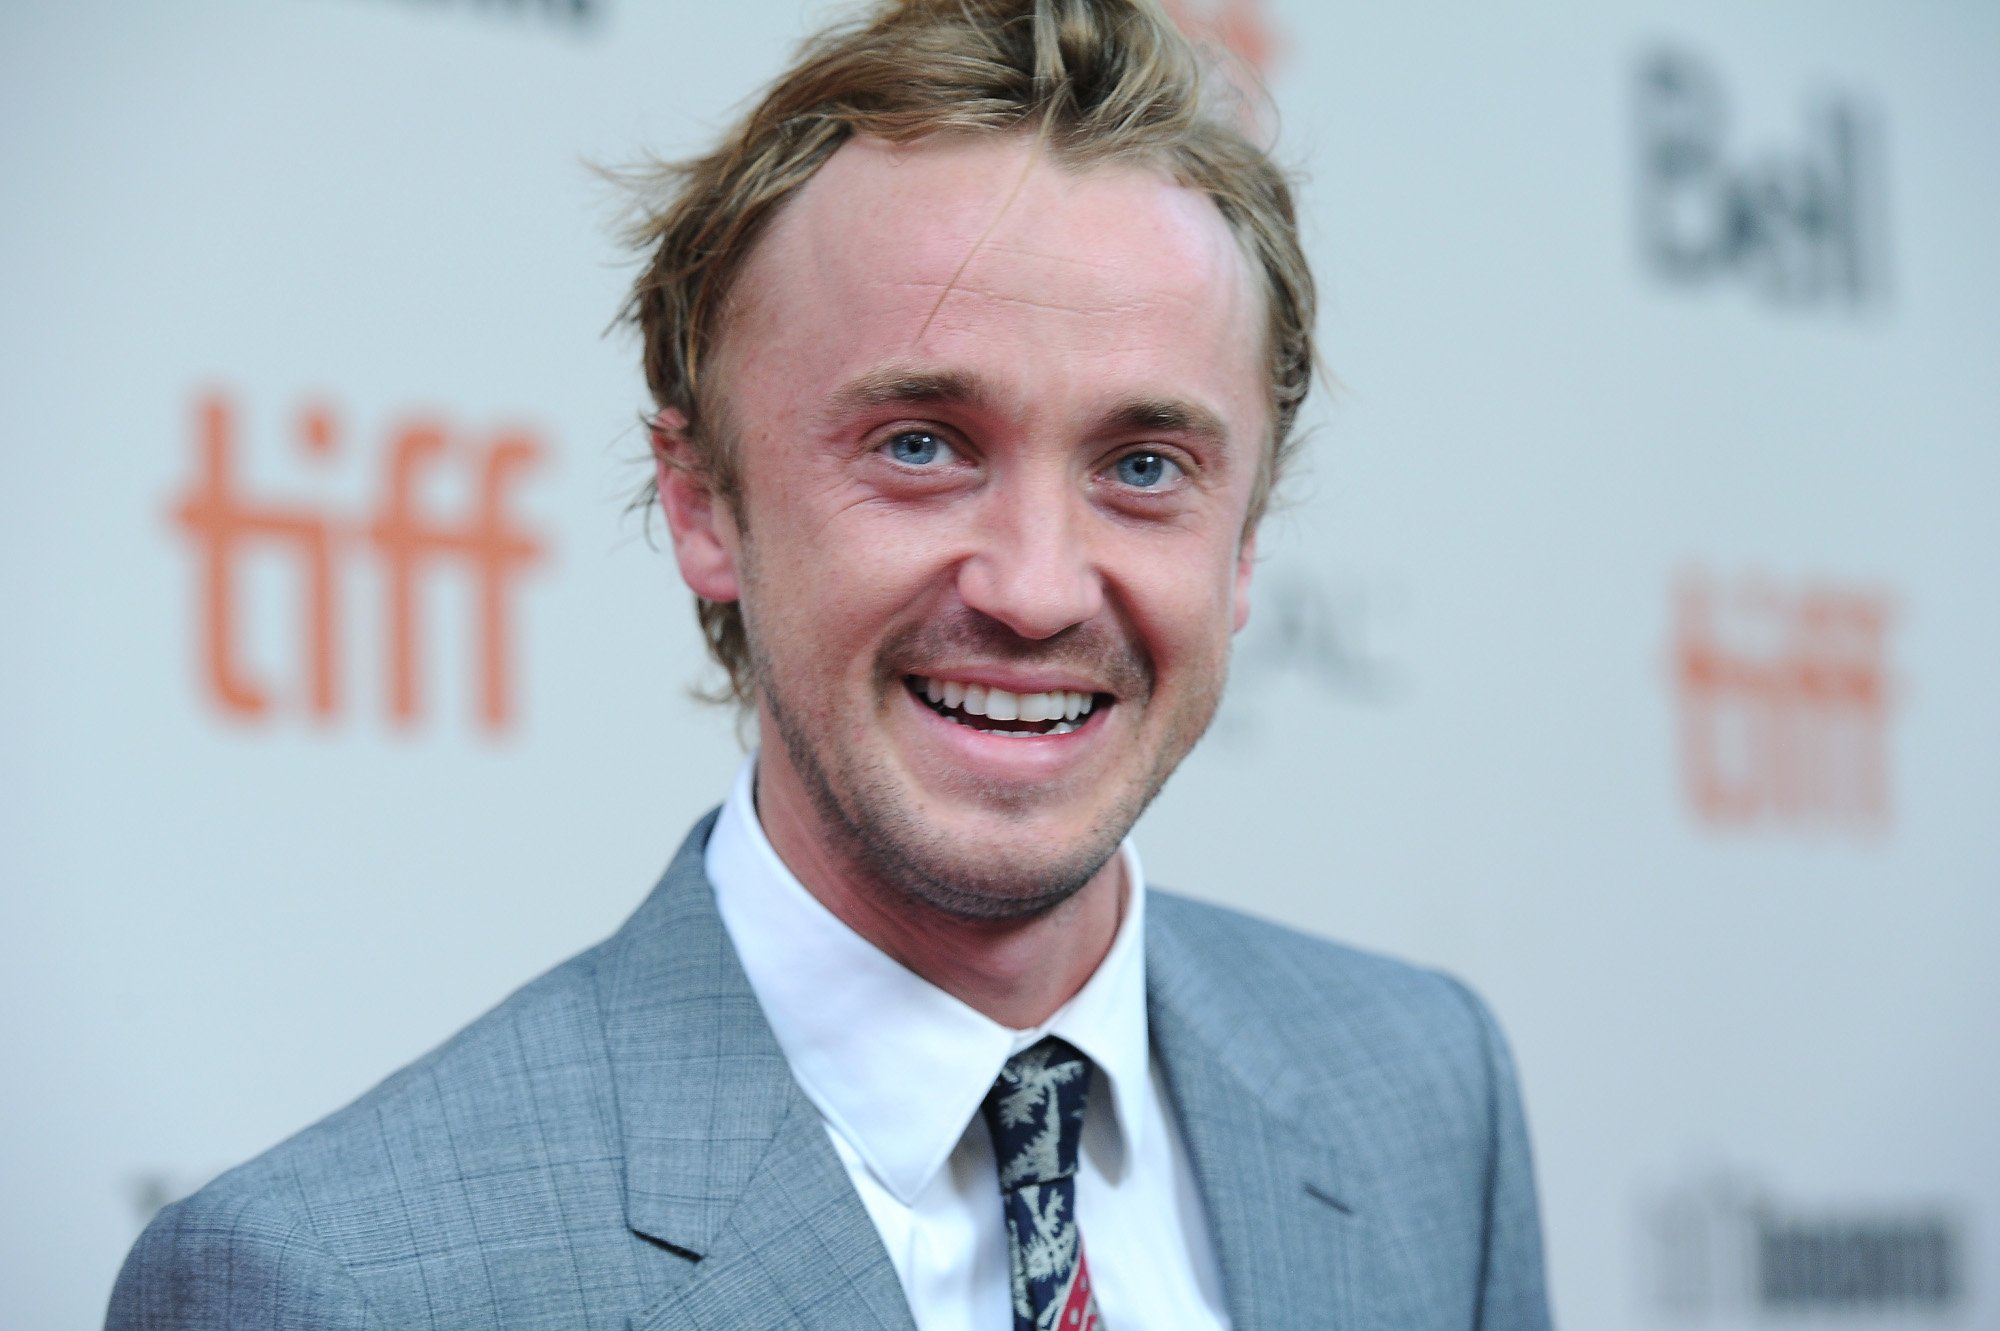 'Harry Potter' star Tom Felton. He's smiling and wearing a grey suit and white shirt.